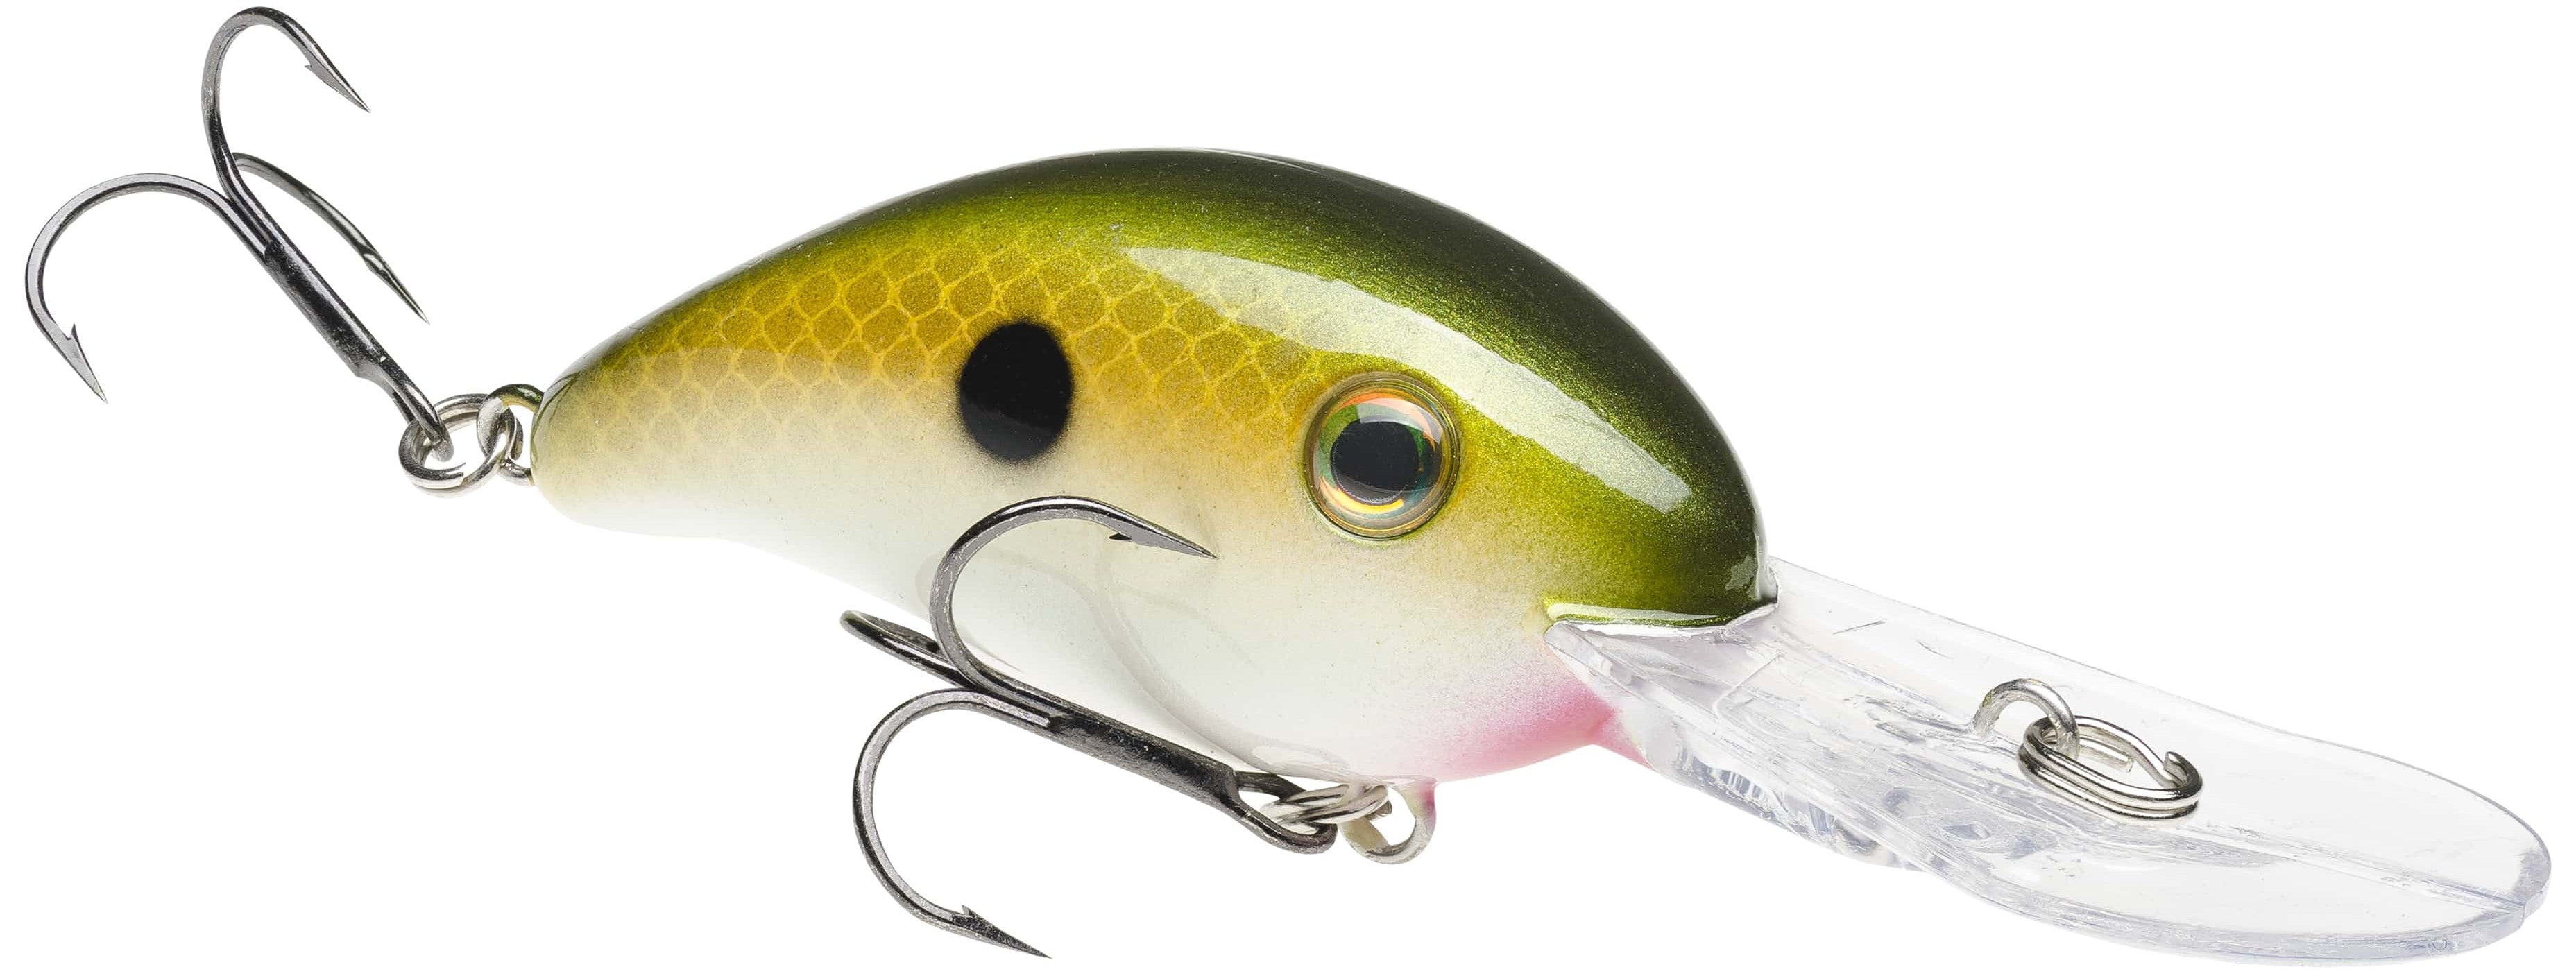 Strike King Pro-Model 3XD Tennessee Shad